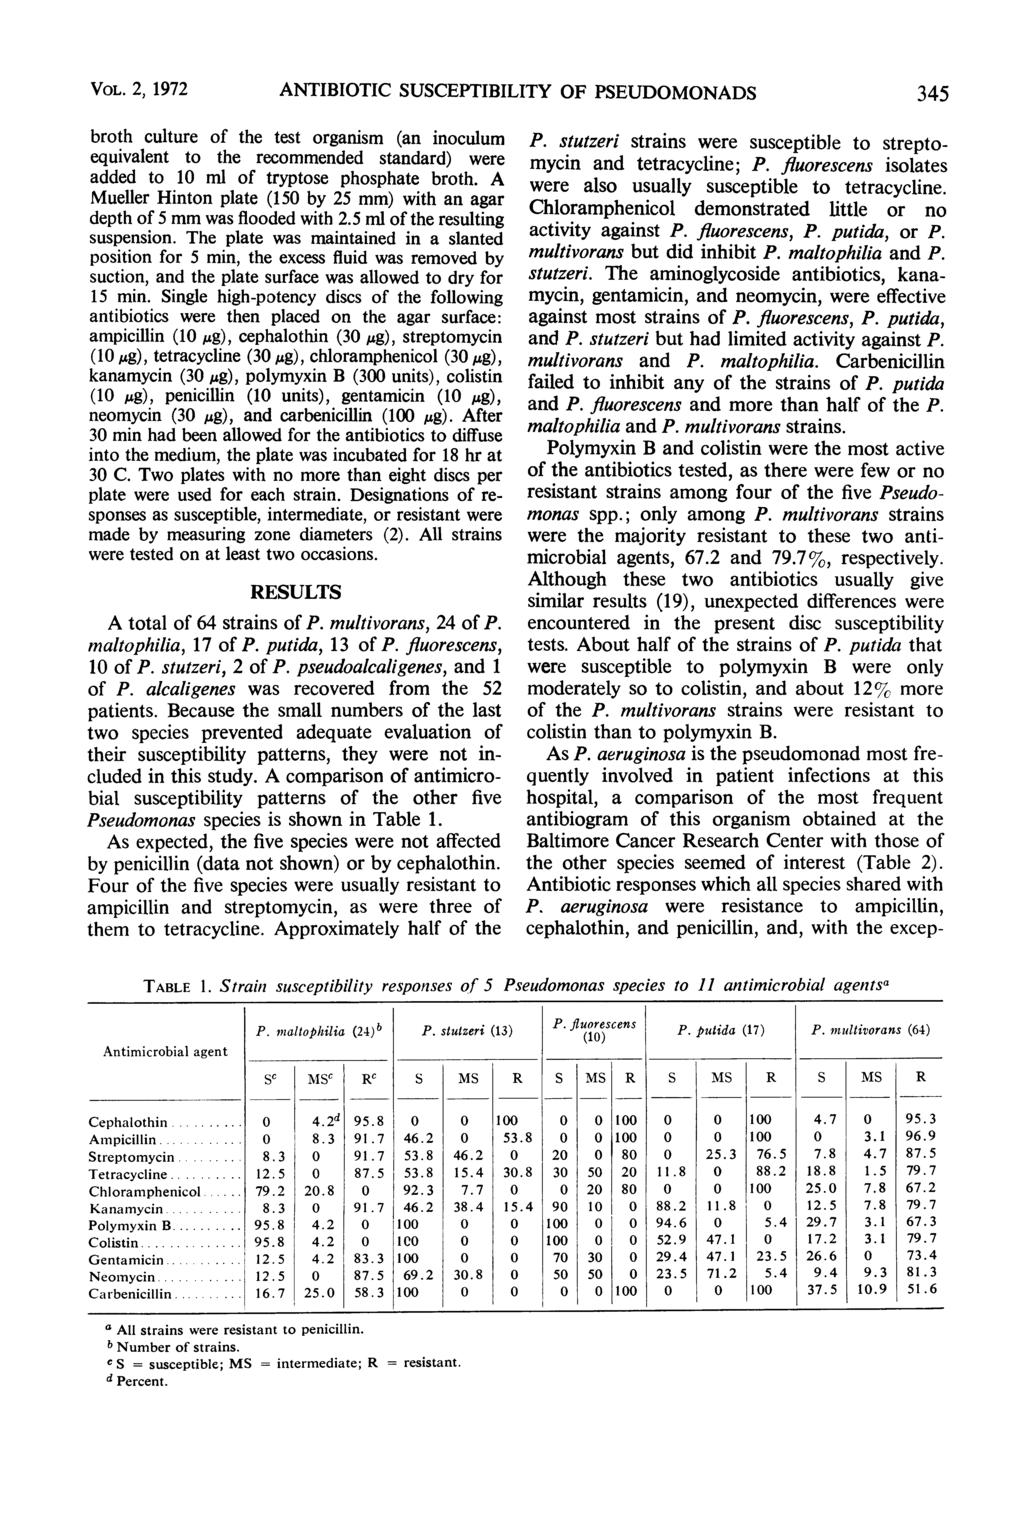 VOL. 2, 1972 ANTIBIOTIC UCEPTIBILITY OF PEUDOMONAD broth culture of the test organism (an inoculum equivalent to the recommended standard) were added to 10 ml of tryptose phosphate broth.